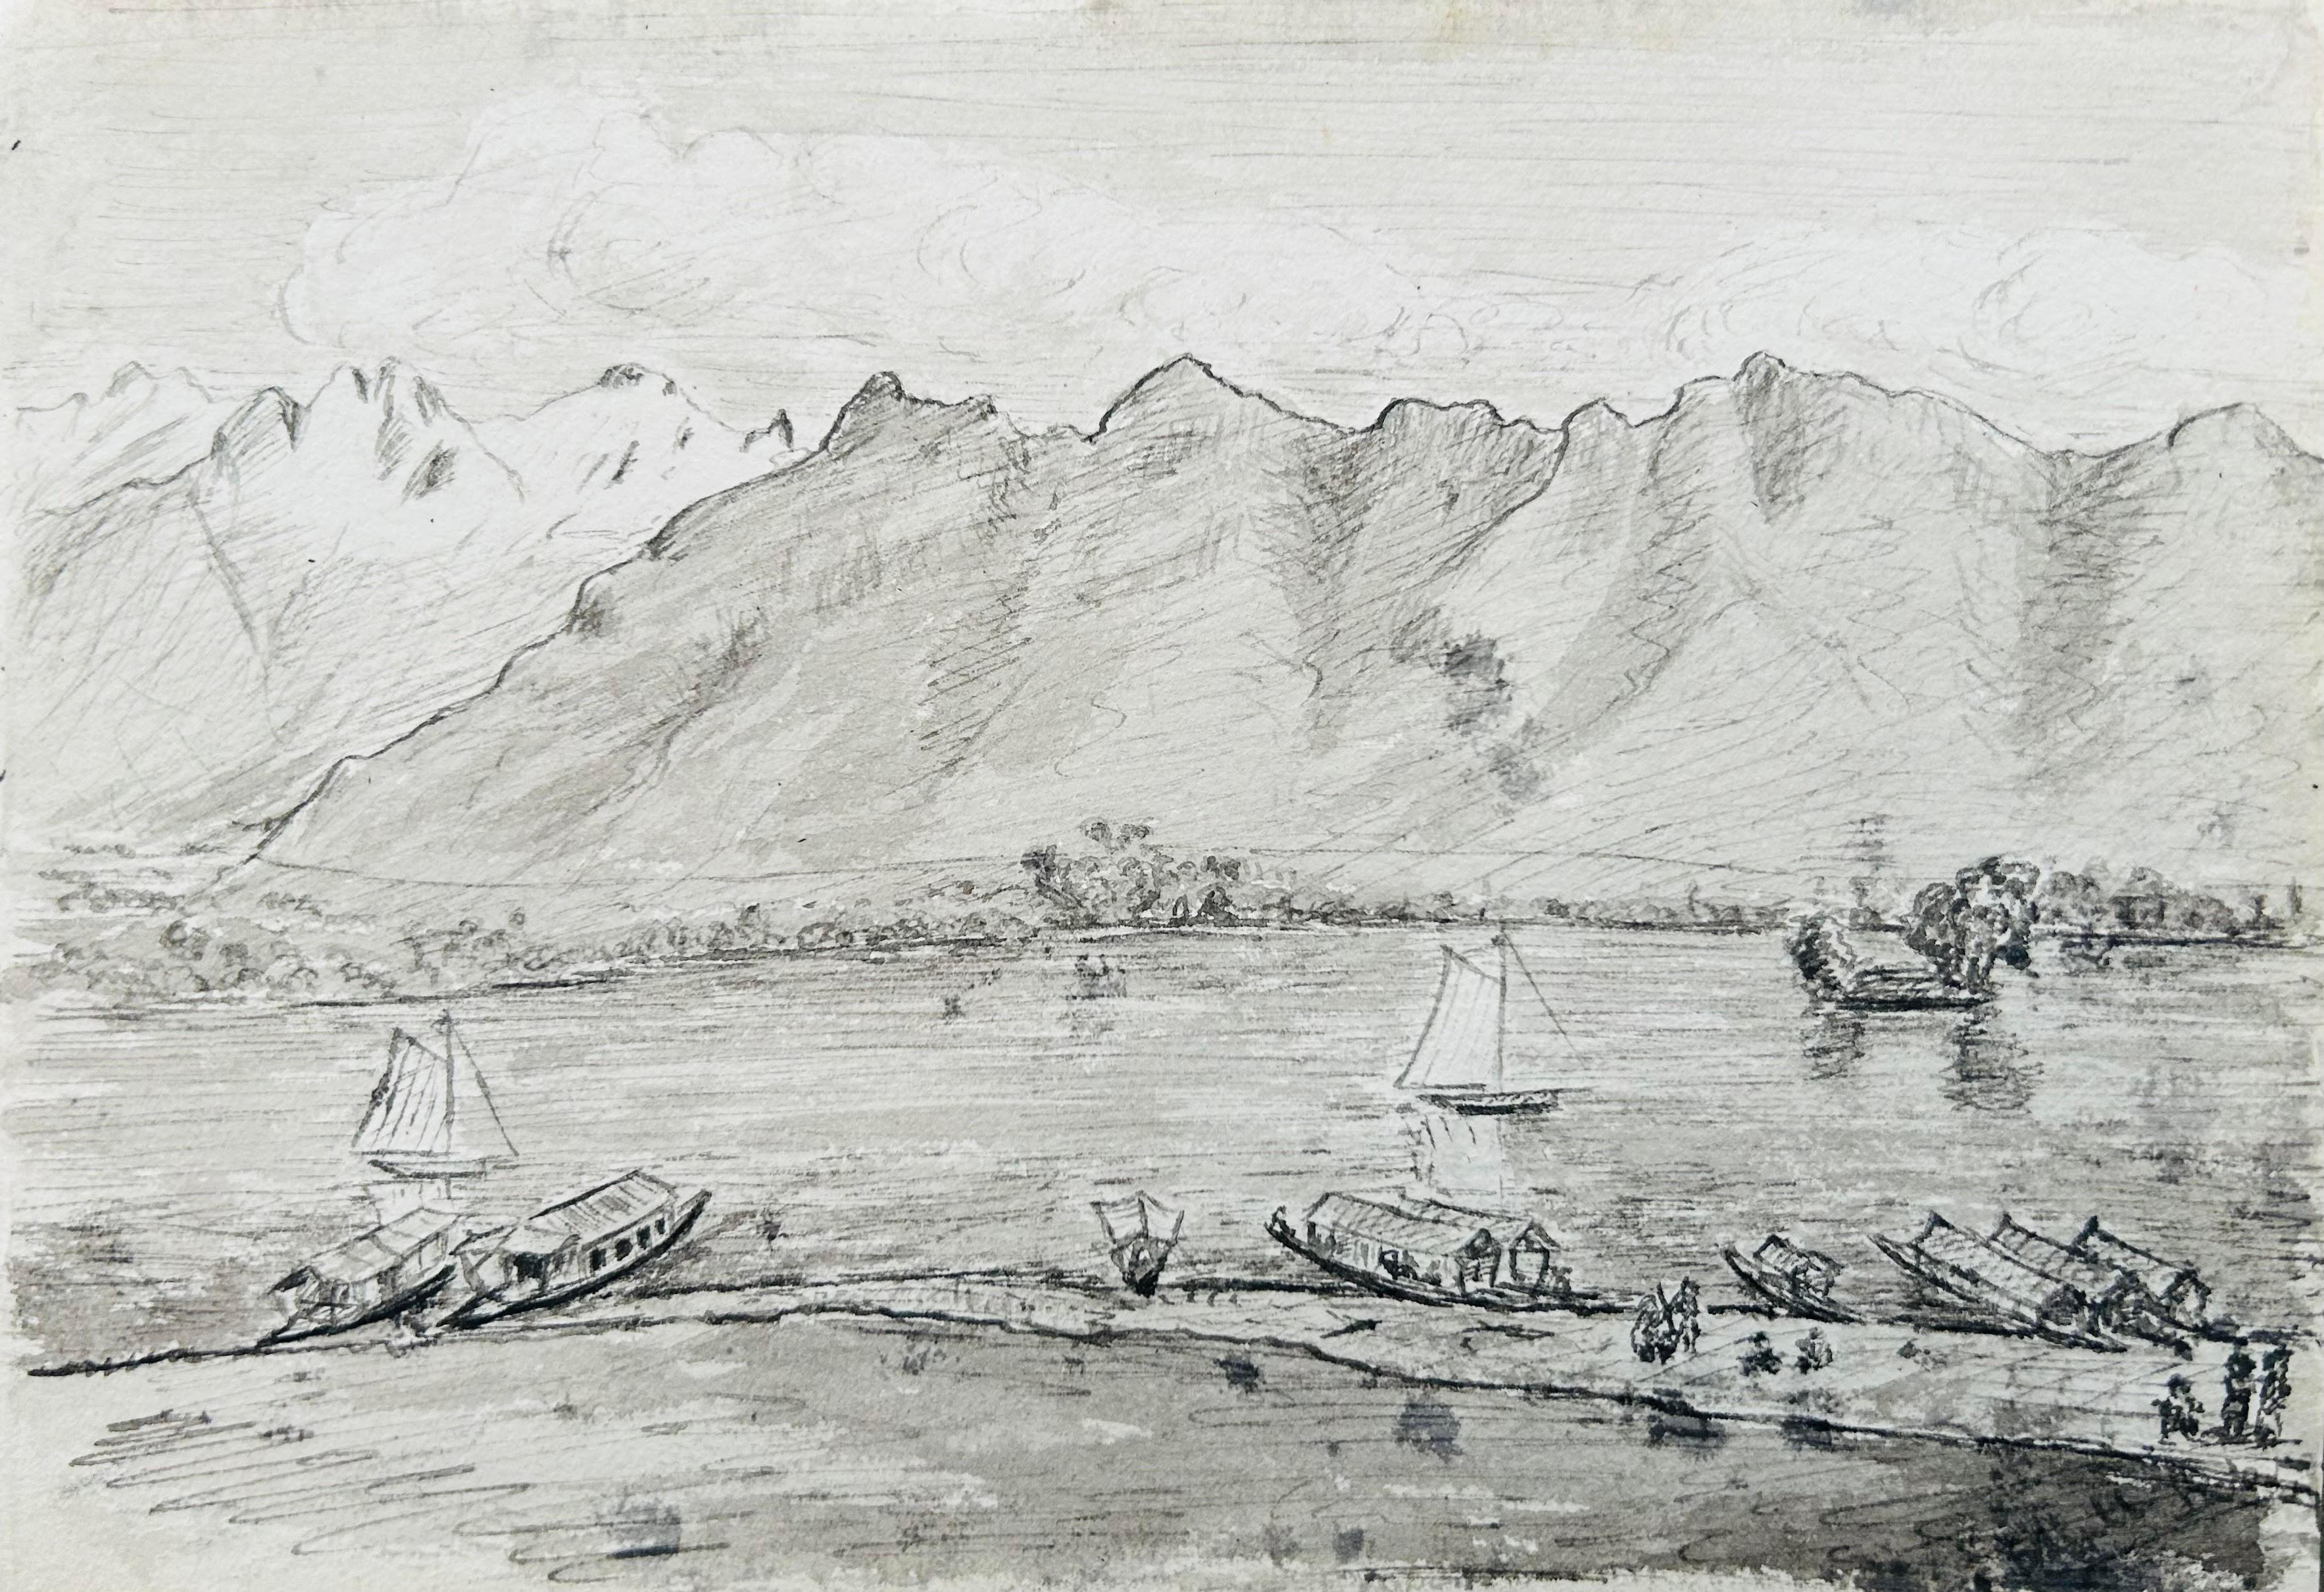 India 3 X 19th century Kashmir NW Frontier Field Sketches Manasbal Lake, Kashmir - Other Art Style Art by Unknown